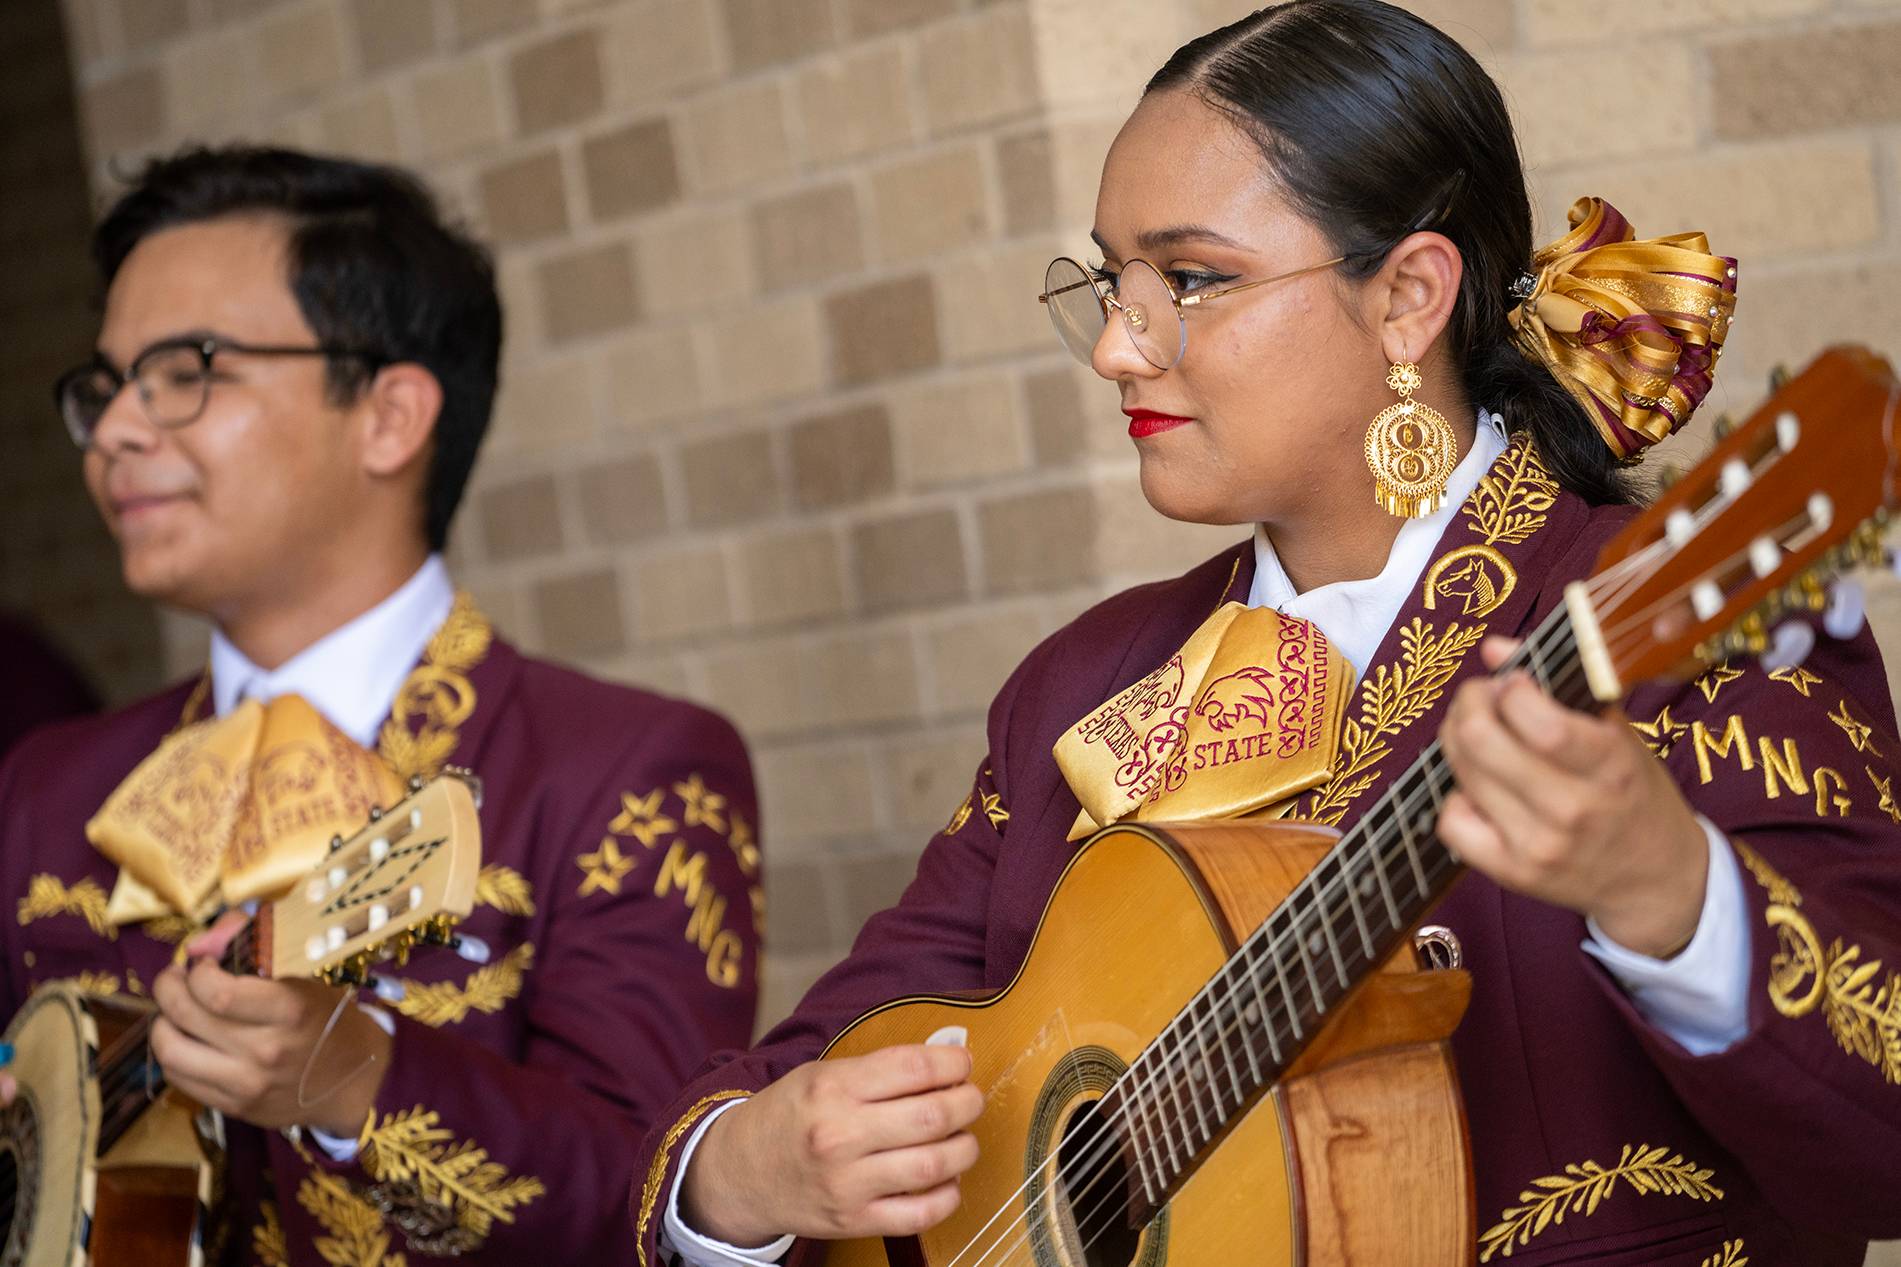 man and woman in mariachi band playing string instruments